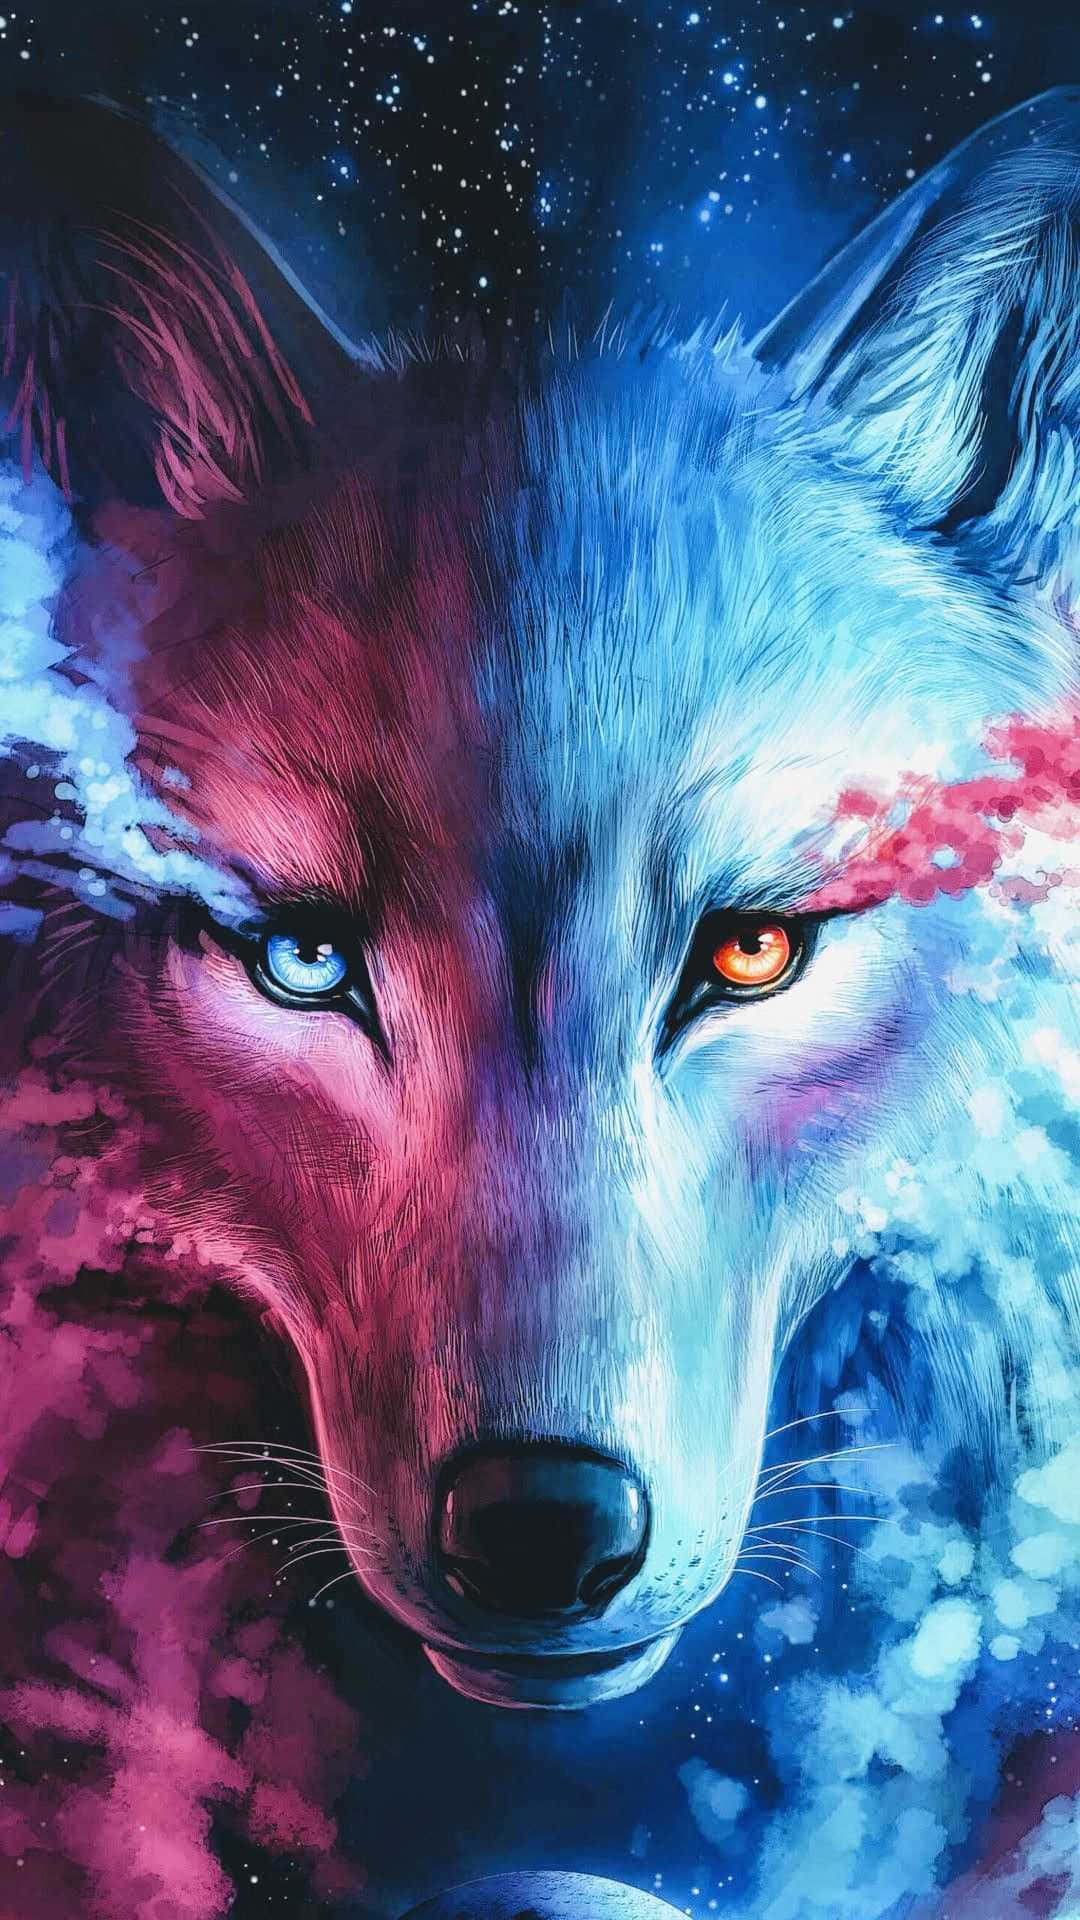 Download The Majestic Beauty of a Pretty Wolf Wallpaper | Wallpapers.com